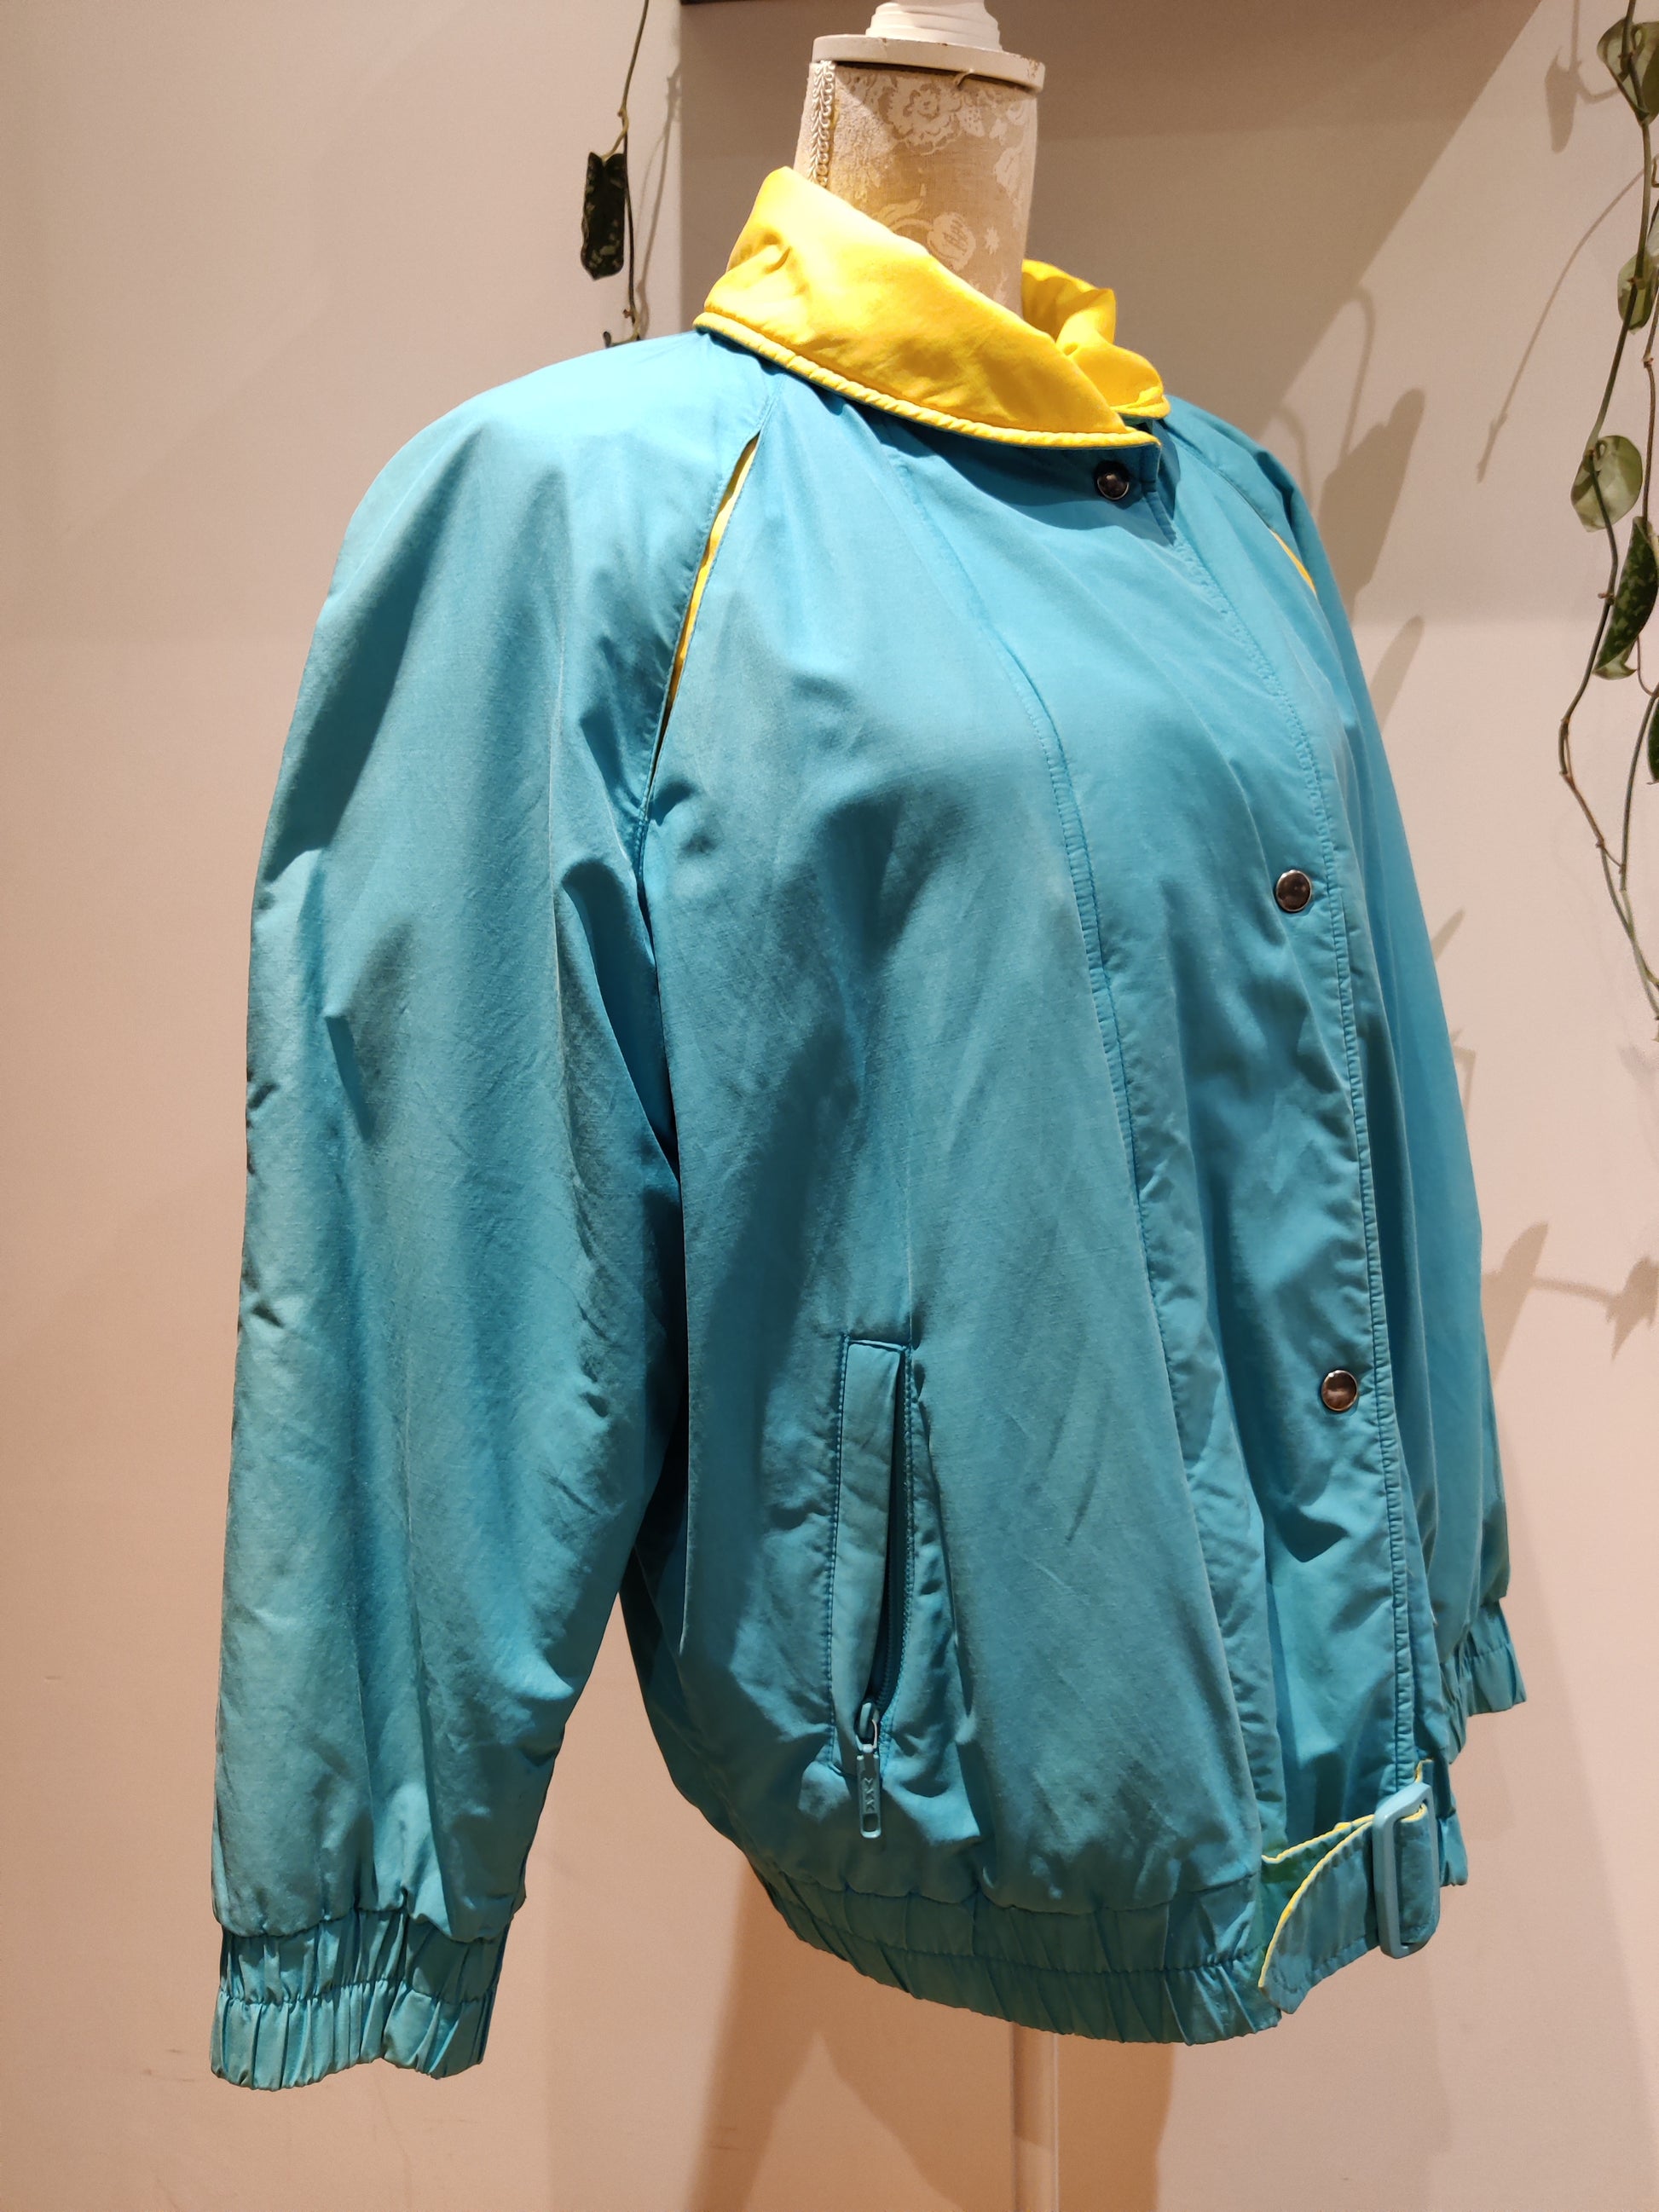 Yellow and blue 80s jacket size 10-12